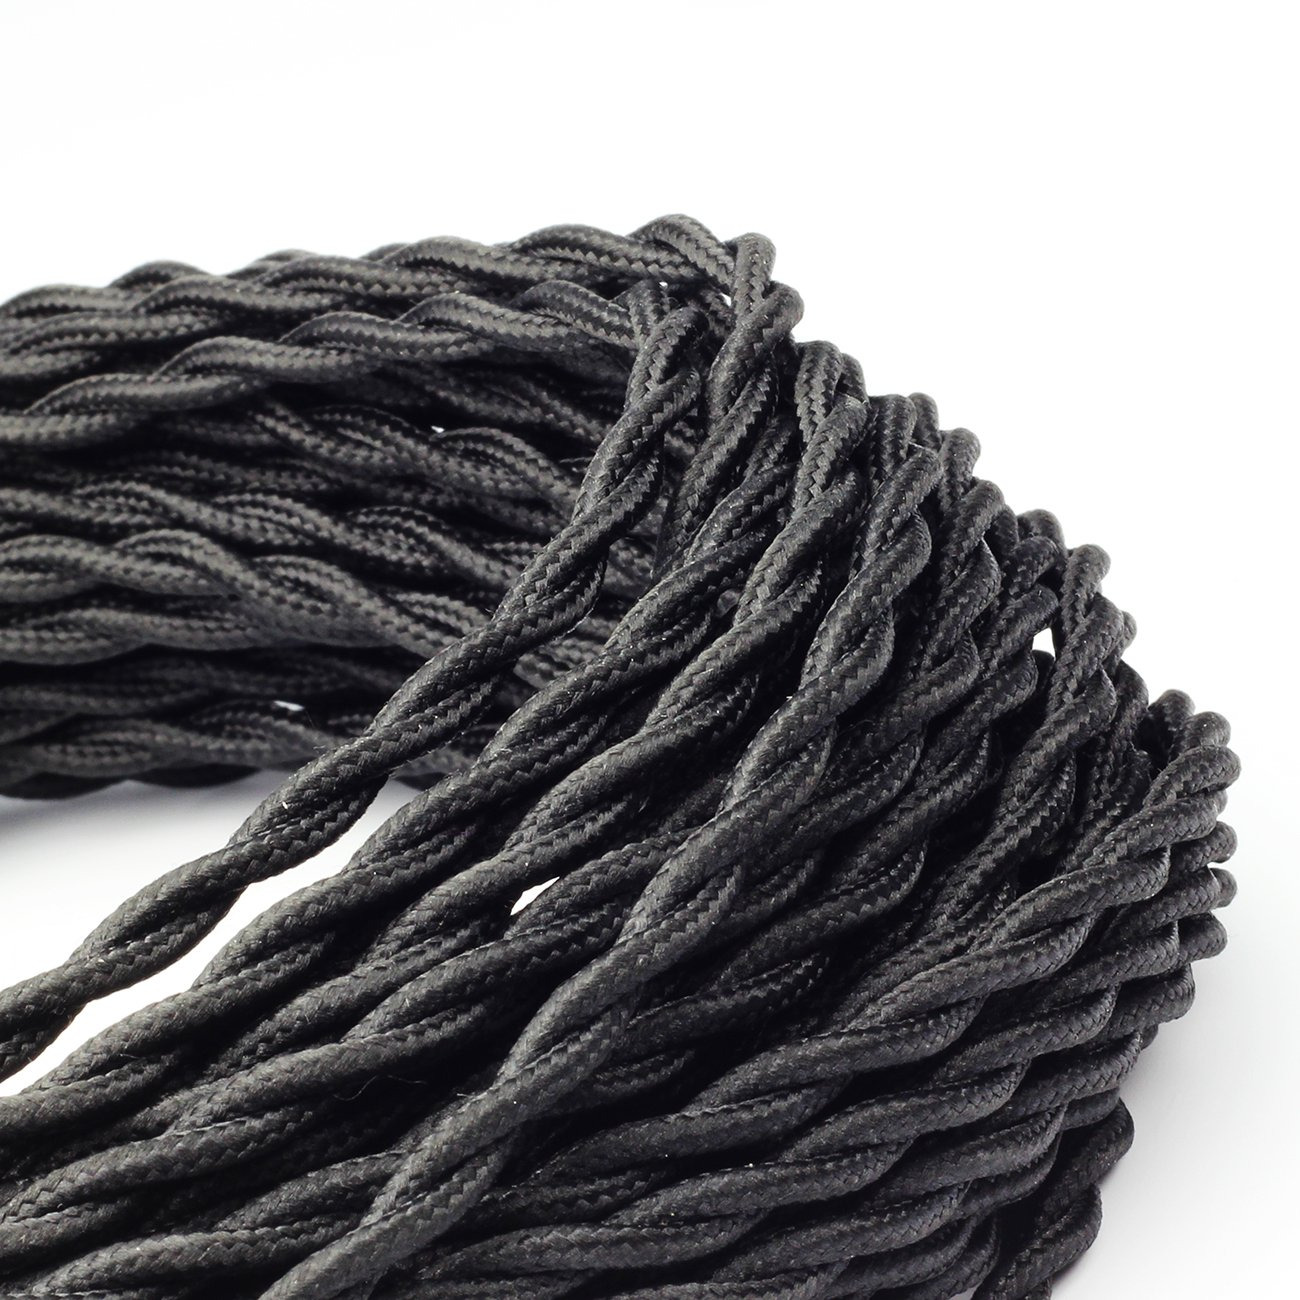 50Ft Black Twisted Cloth Covered 2Conductor 18Gauge Industrial Fabric Cord Cable